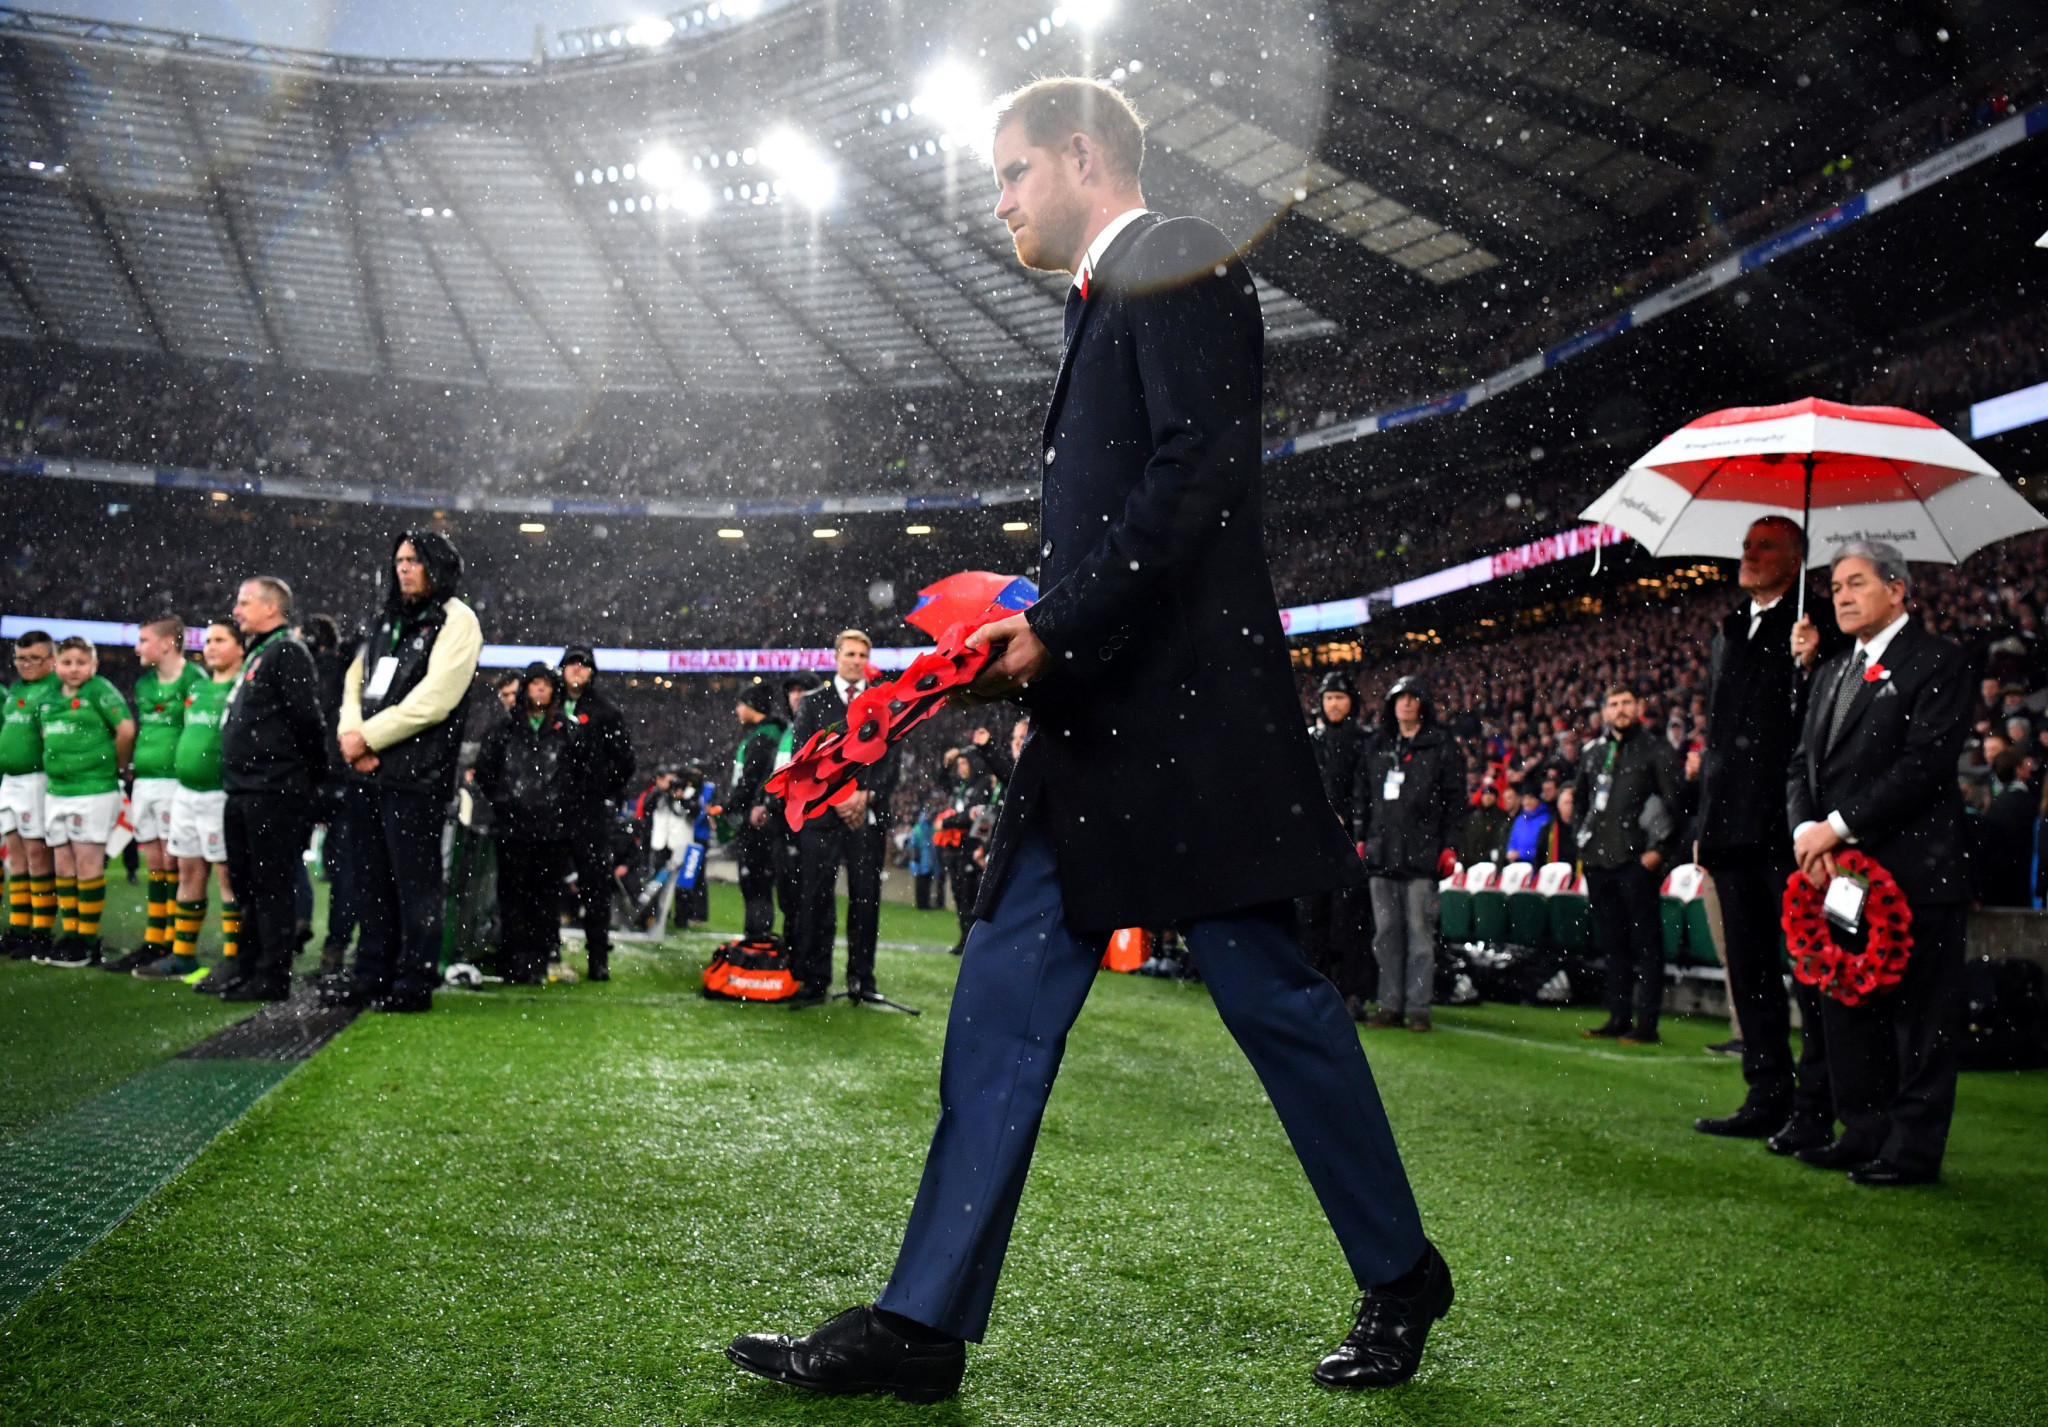 Sport has remembered the fallen this weekend with British Royal Prince Harry laying a wreath at England's rugby international with New Zealand at Twickenham ©Getty Images